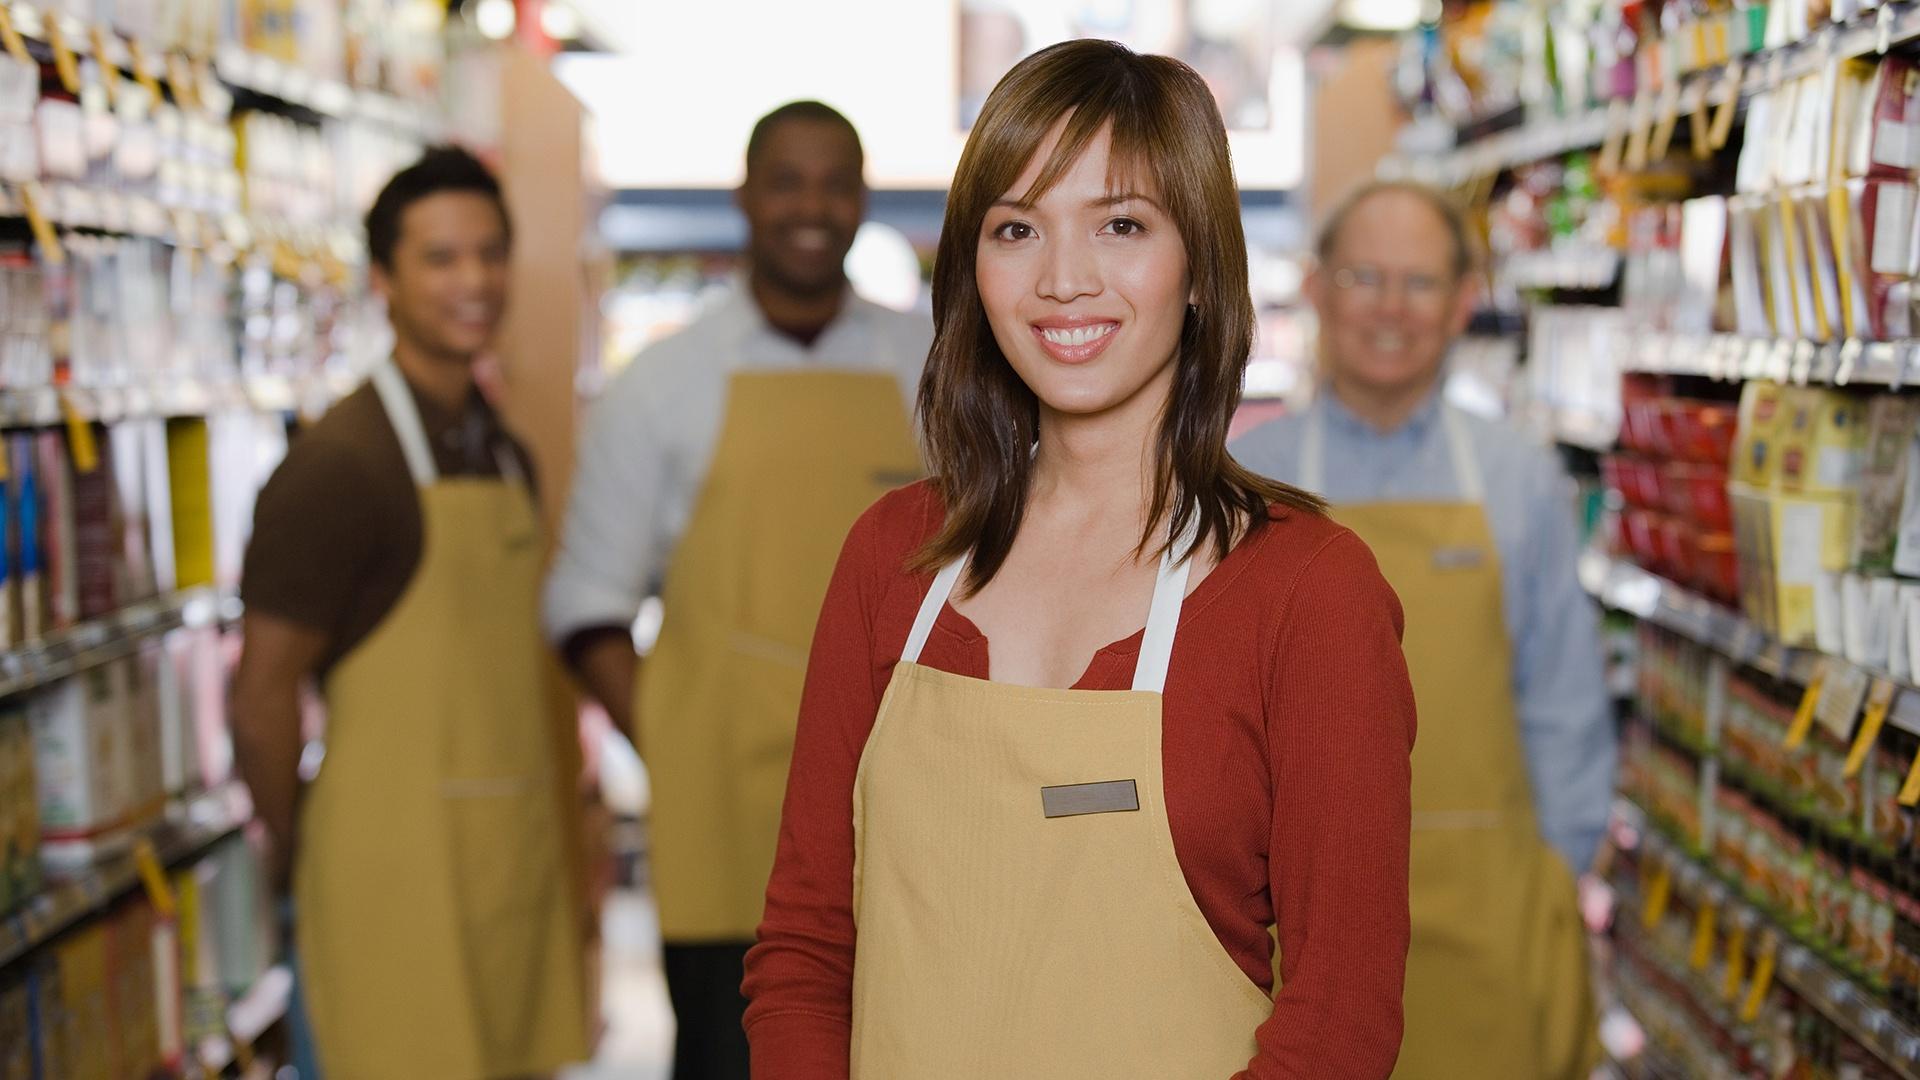 One woman standing in front of three mean all wearing aprons